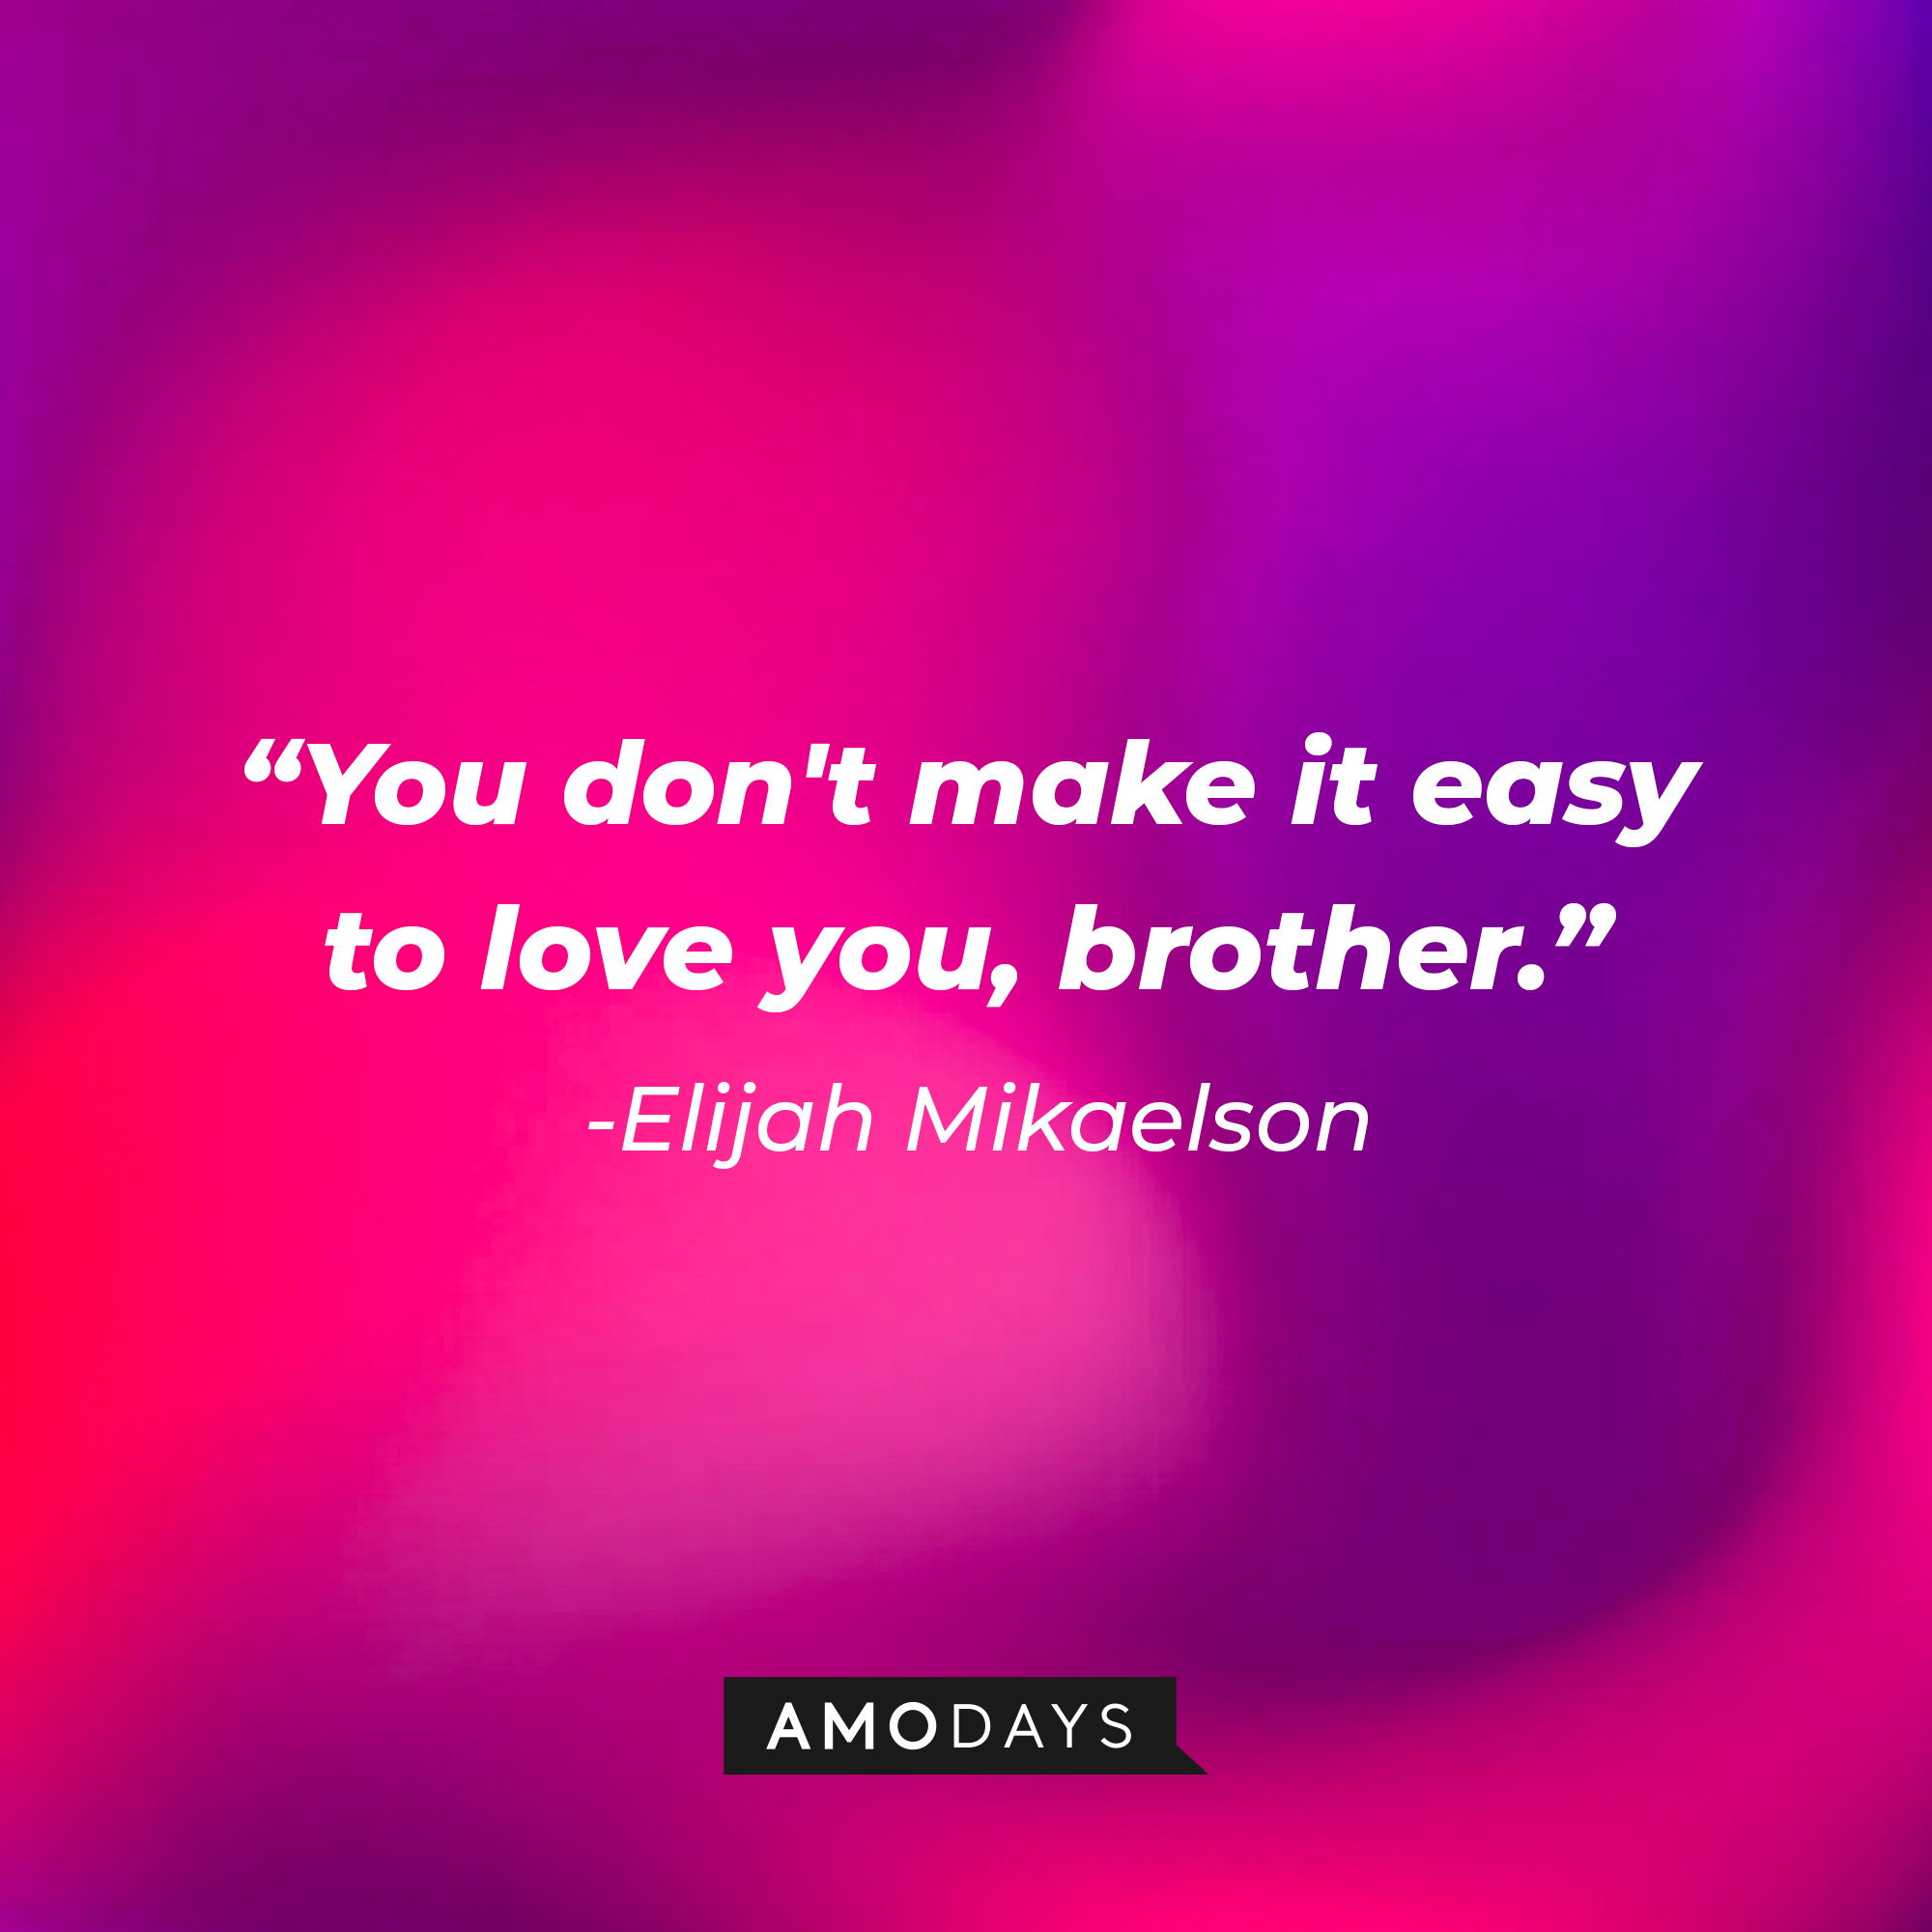 Elijah Mikaelson's quote: "You don't make it easy to love you, brother." | Source: facebook.com/thevampirediaries